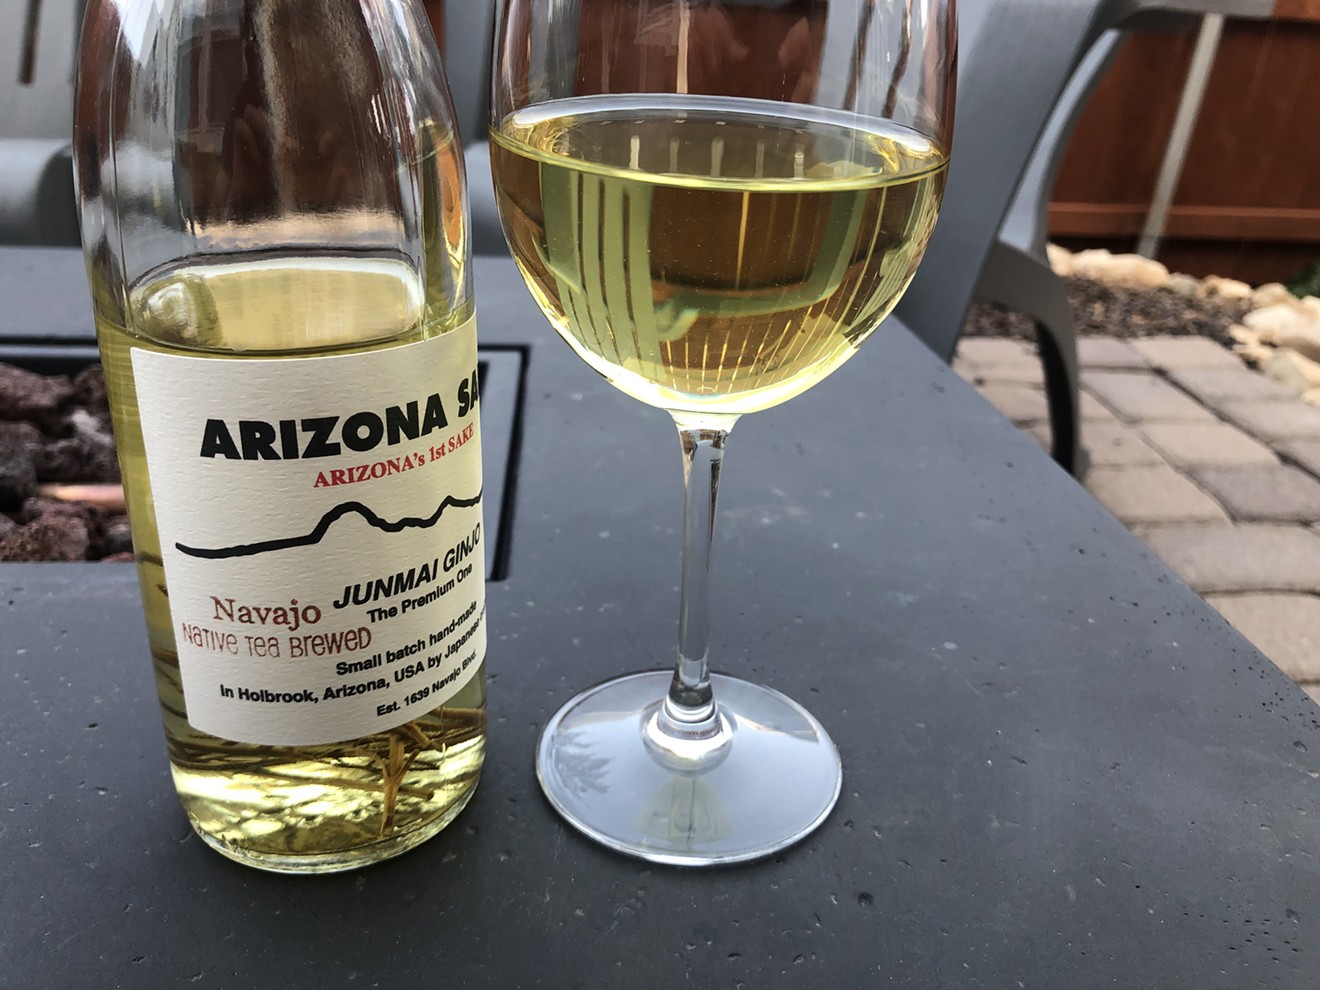 Arizona Sake's latest bottle is infused with the herb known as Navajo Tea.